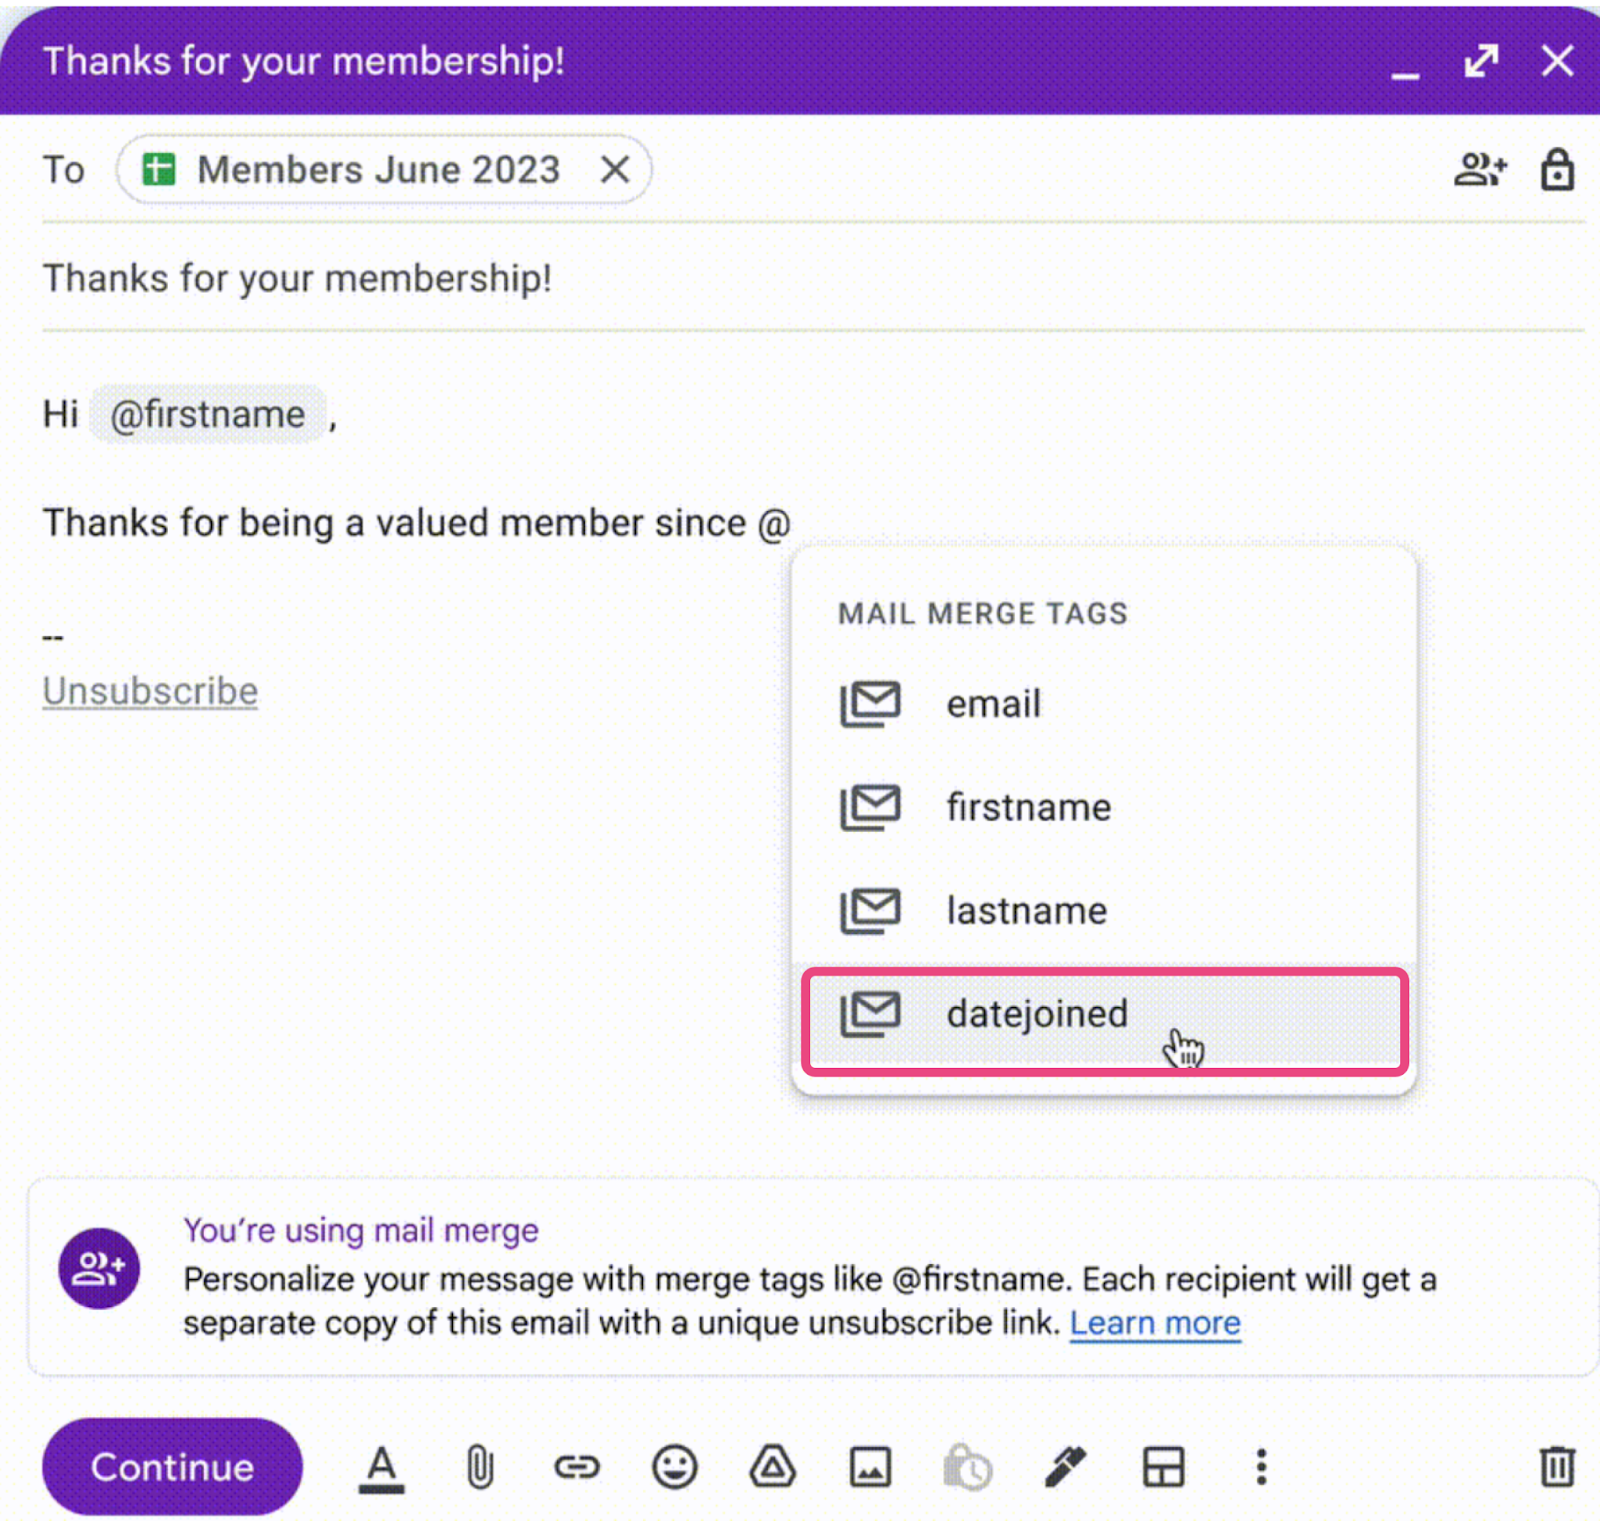 Inserting a mail merge field called datejoined